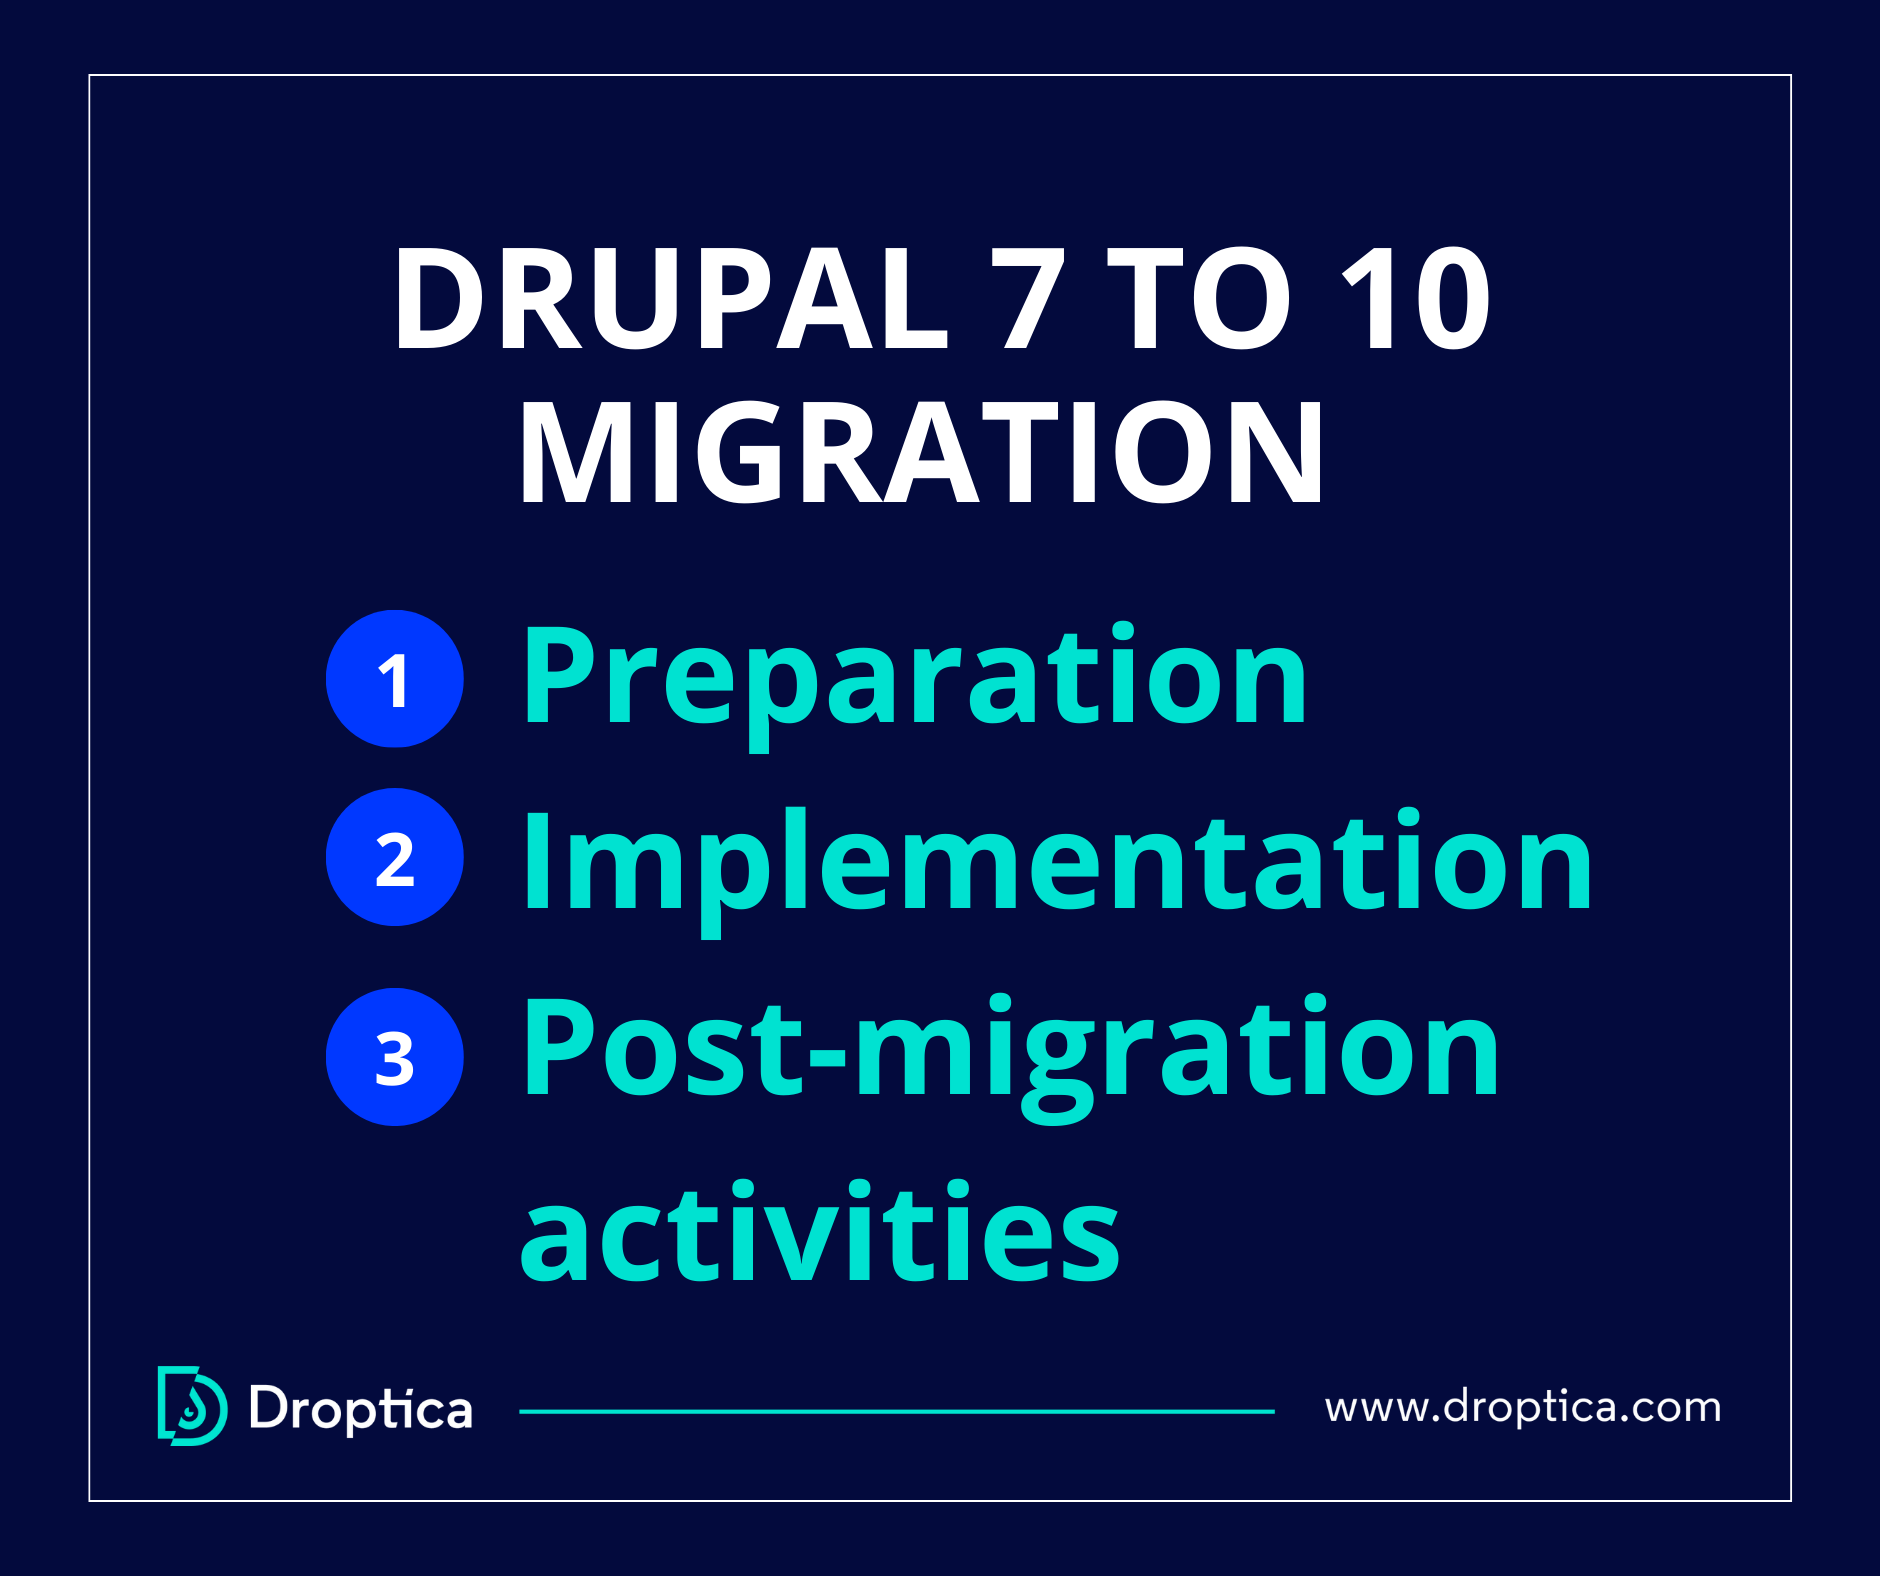 Drupal 7 to 10 migration consists of preparation, implementation, and post-migration activities. 